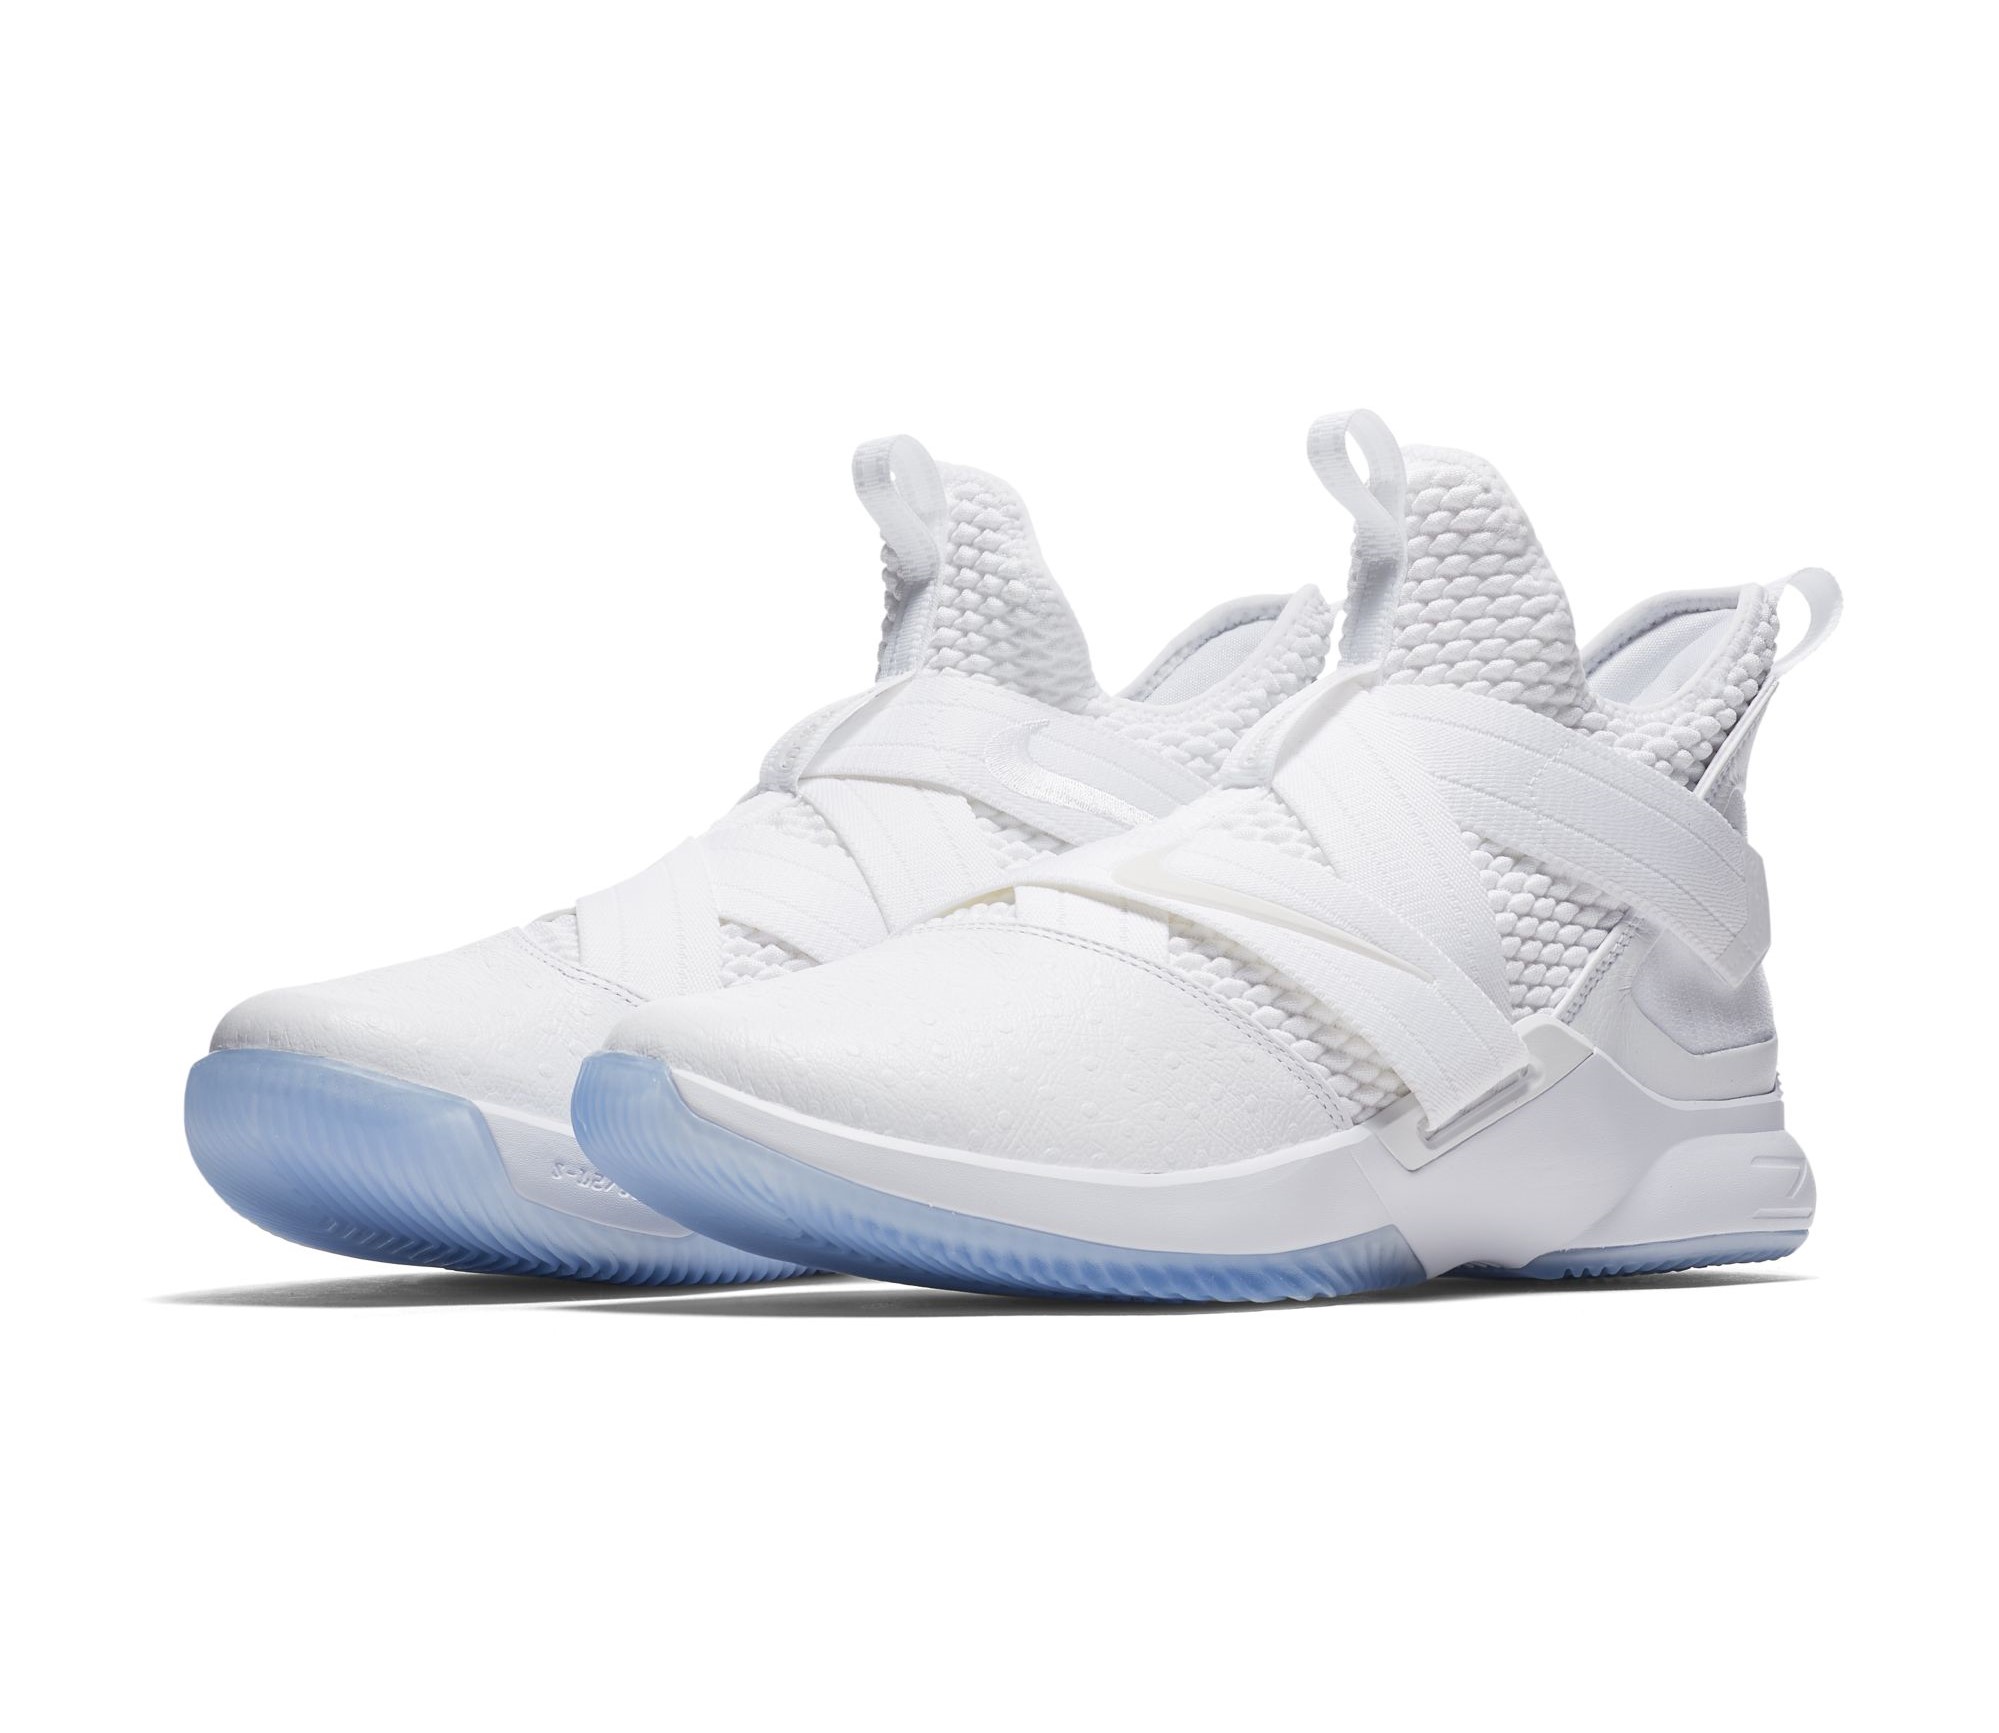 all white lebron soldier 12 cheap online